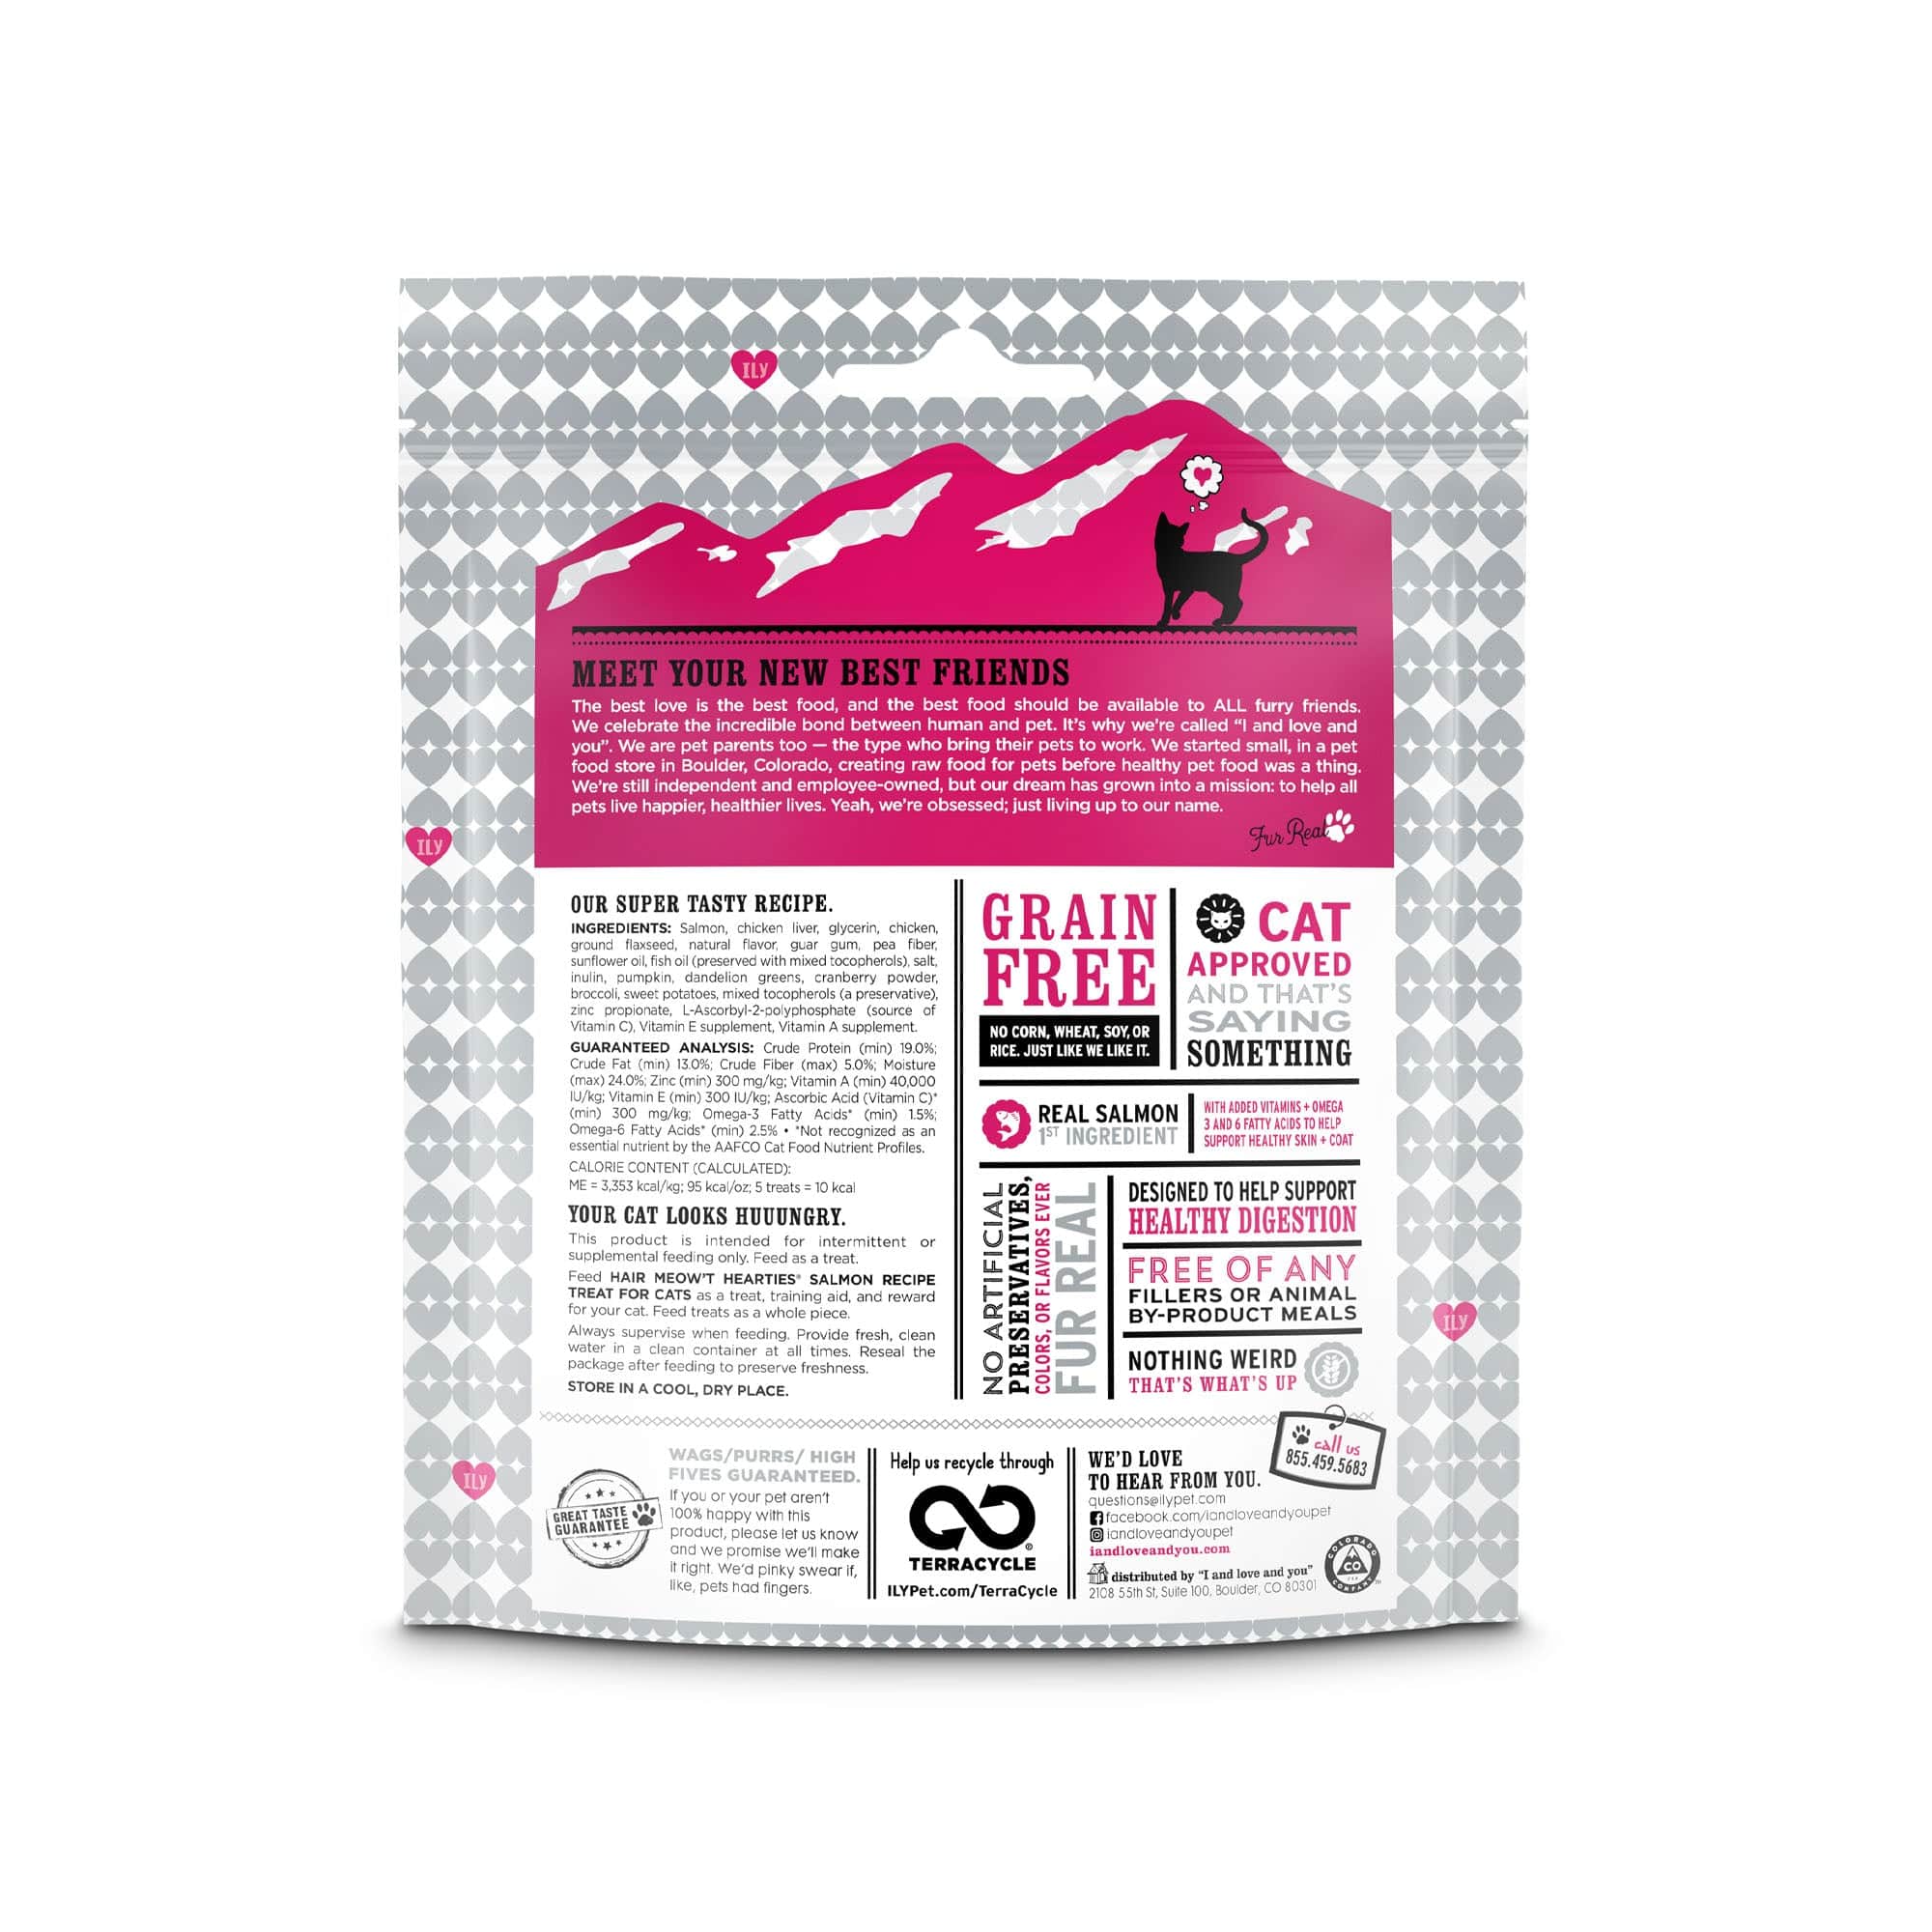 A bag of Hair Meow't Hearties cat food. Package back side with list of ingredients, instructions and barcode